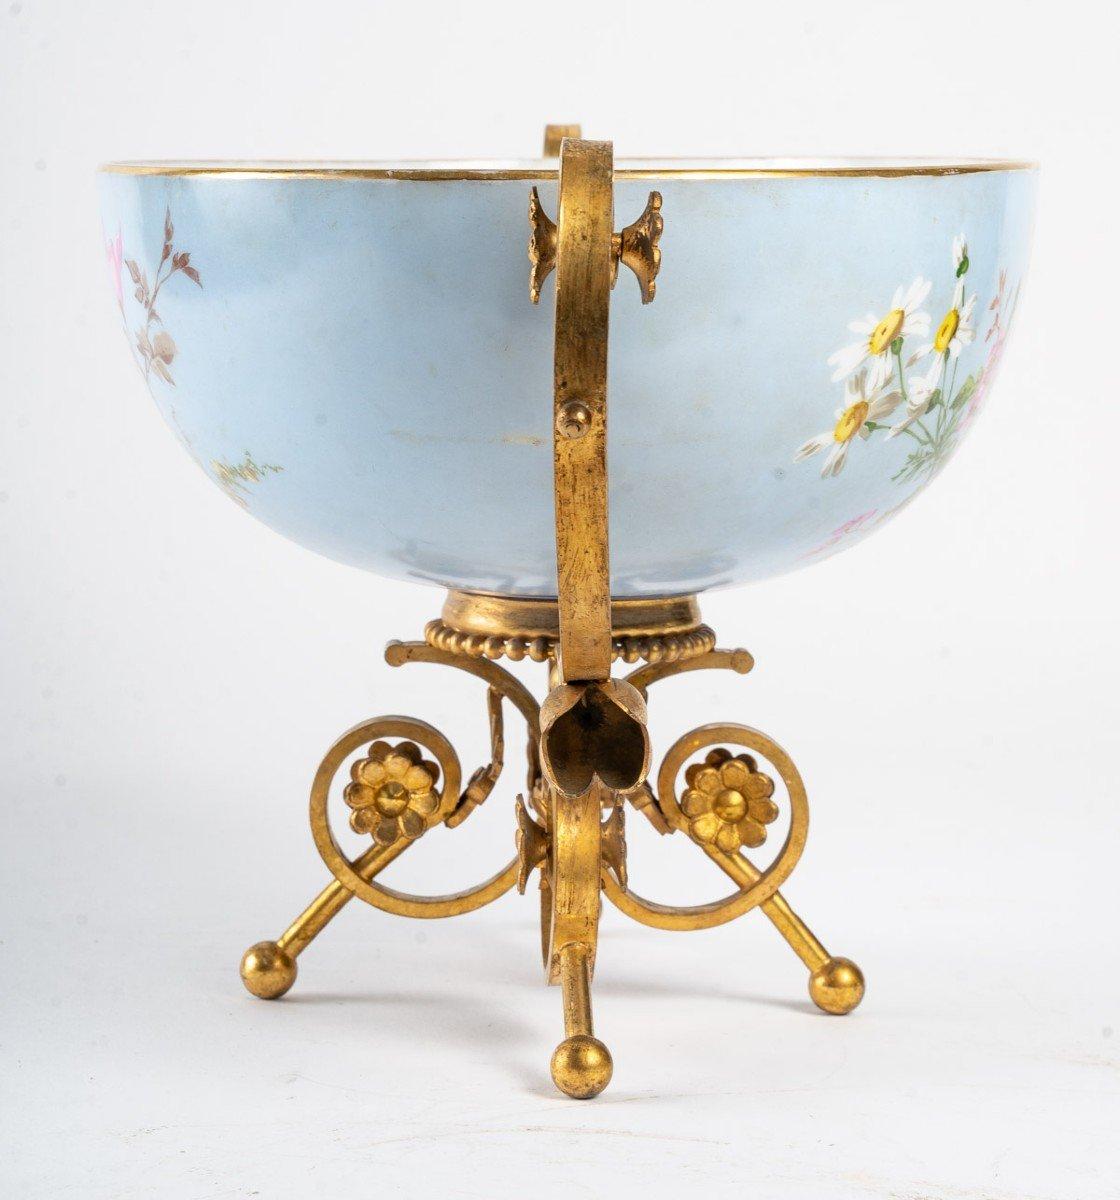 Beautiful Baccarat Opaline cup with bronze base 19th century
Period : 19th century
Style : Napoleon III
Measures: Width: 47 cm
Height: 23 cm
Depth: 24 cm.